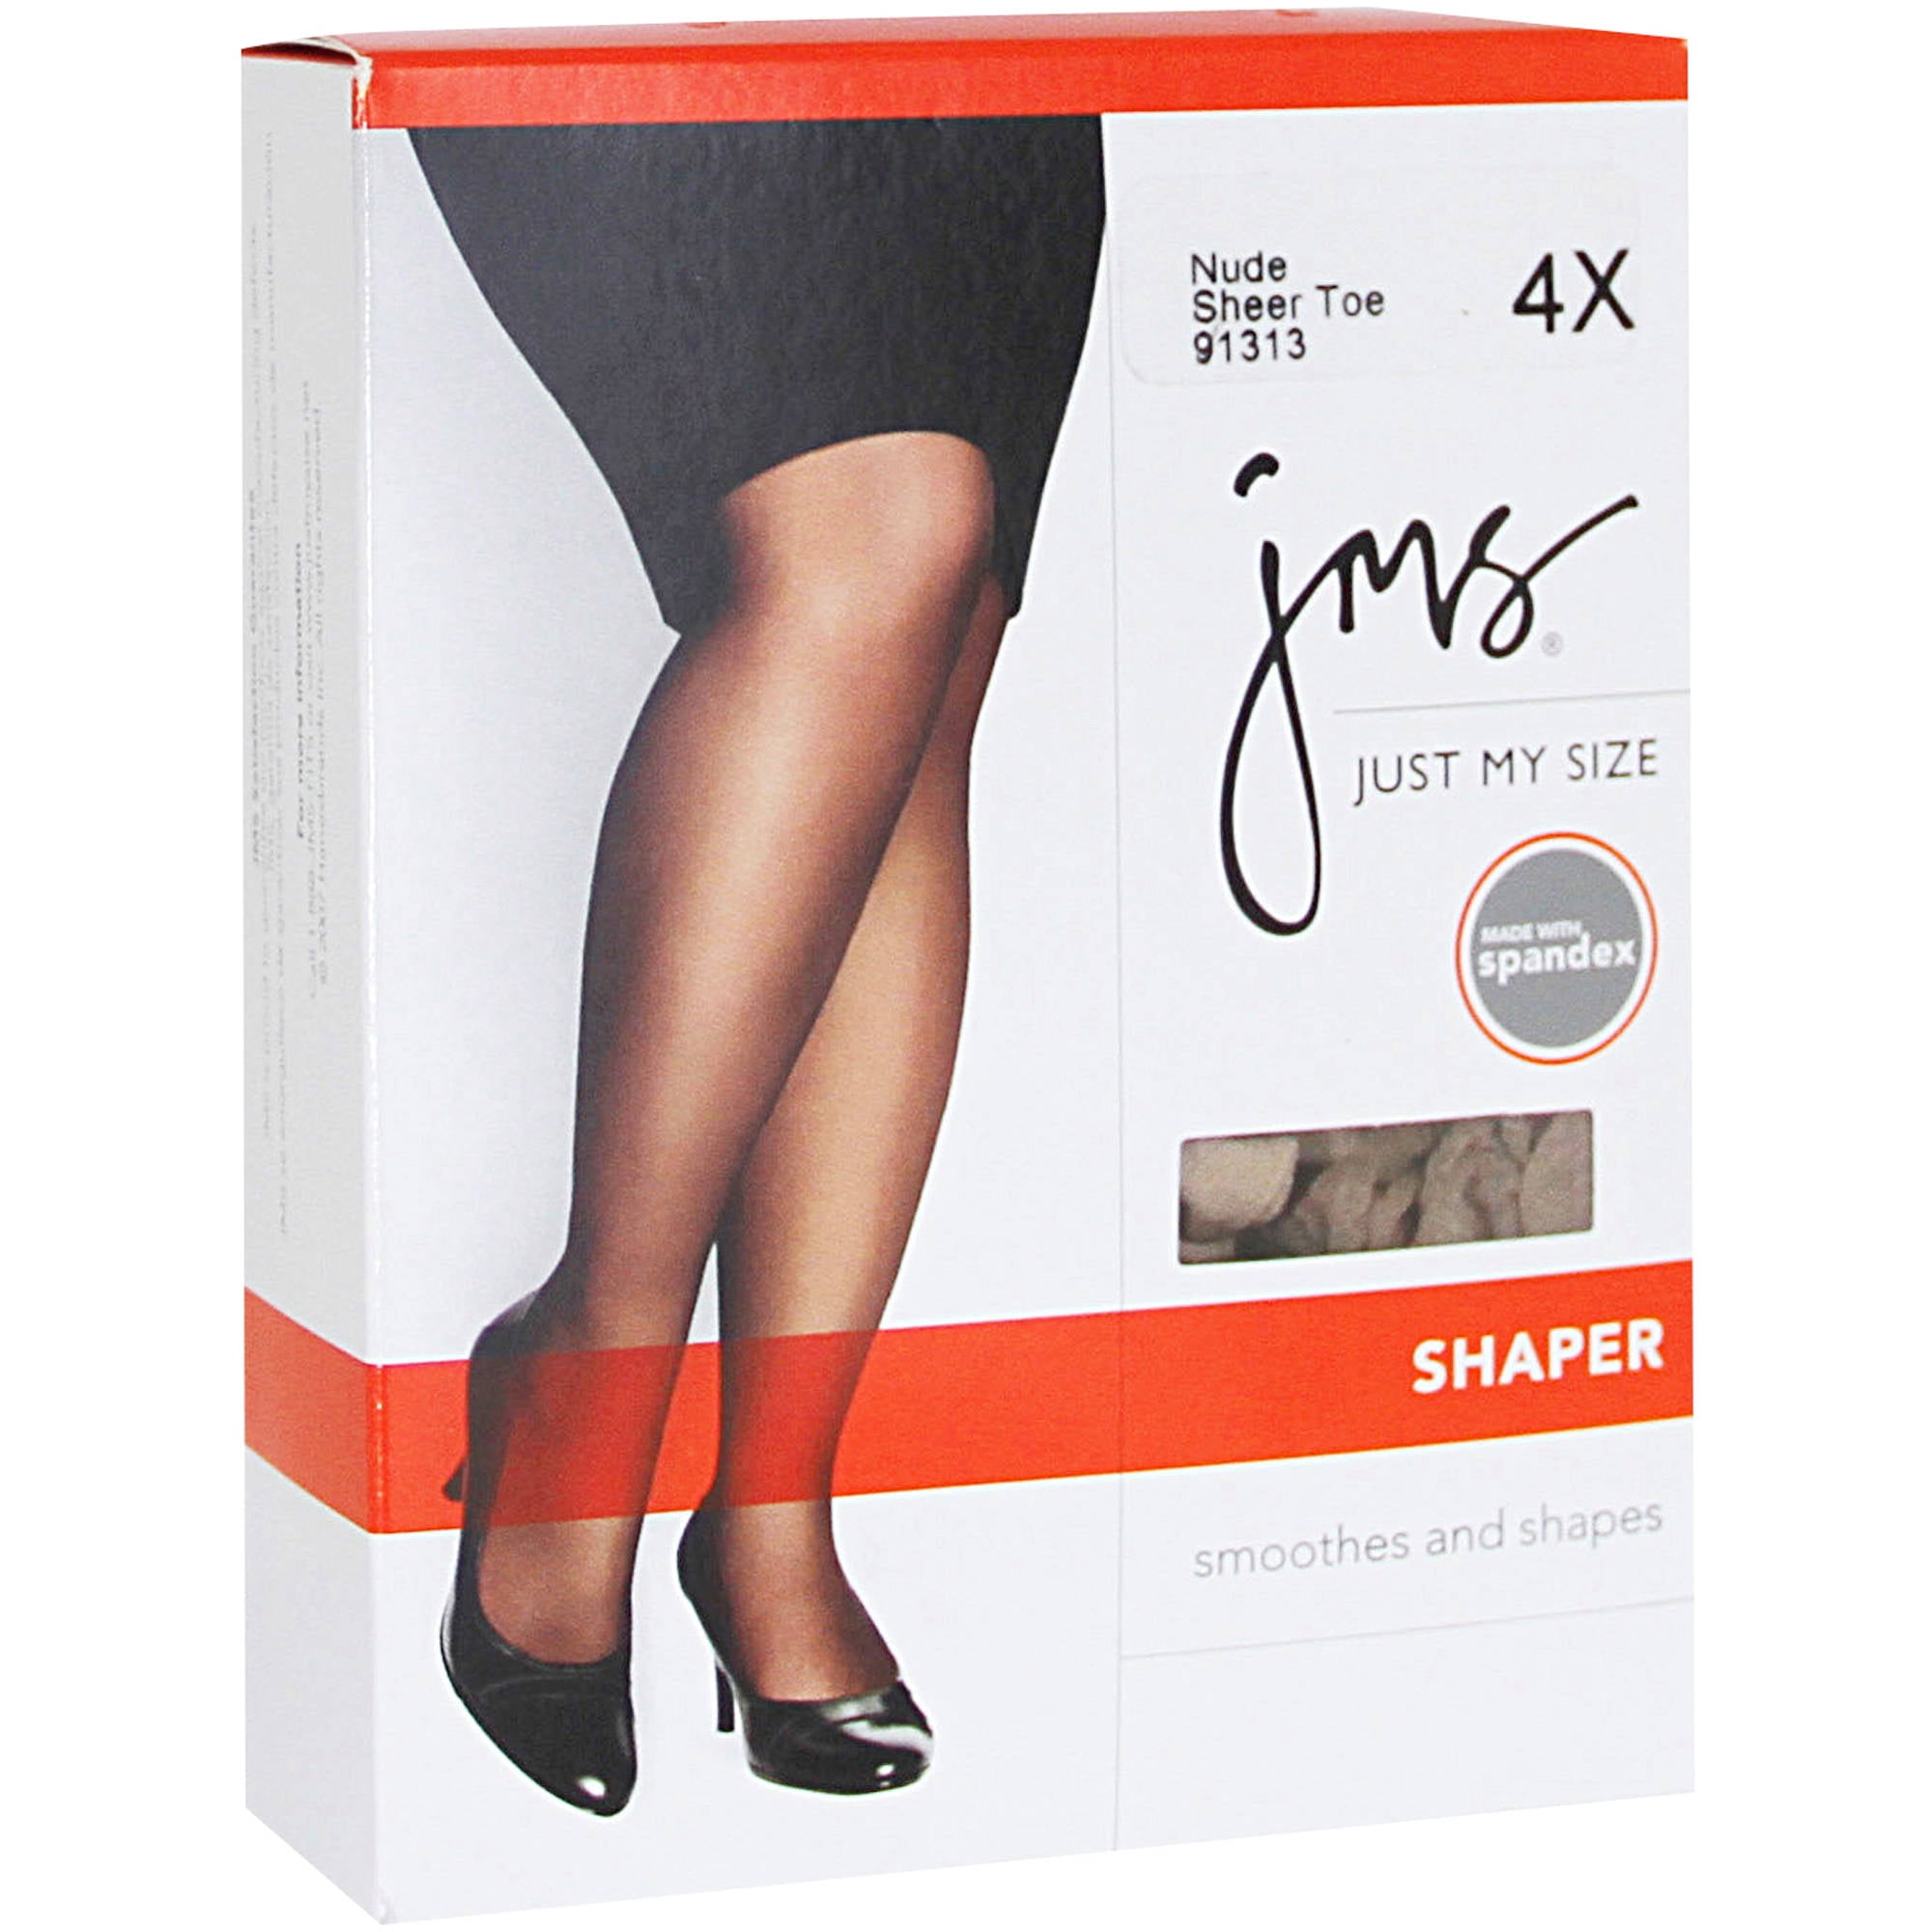 Just My Size Silky Sheer Body Shaper Pantyhose Nude 91313 4x Sheer Toe 2 Ct  for sale online